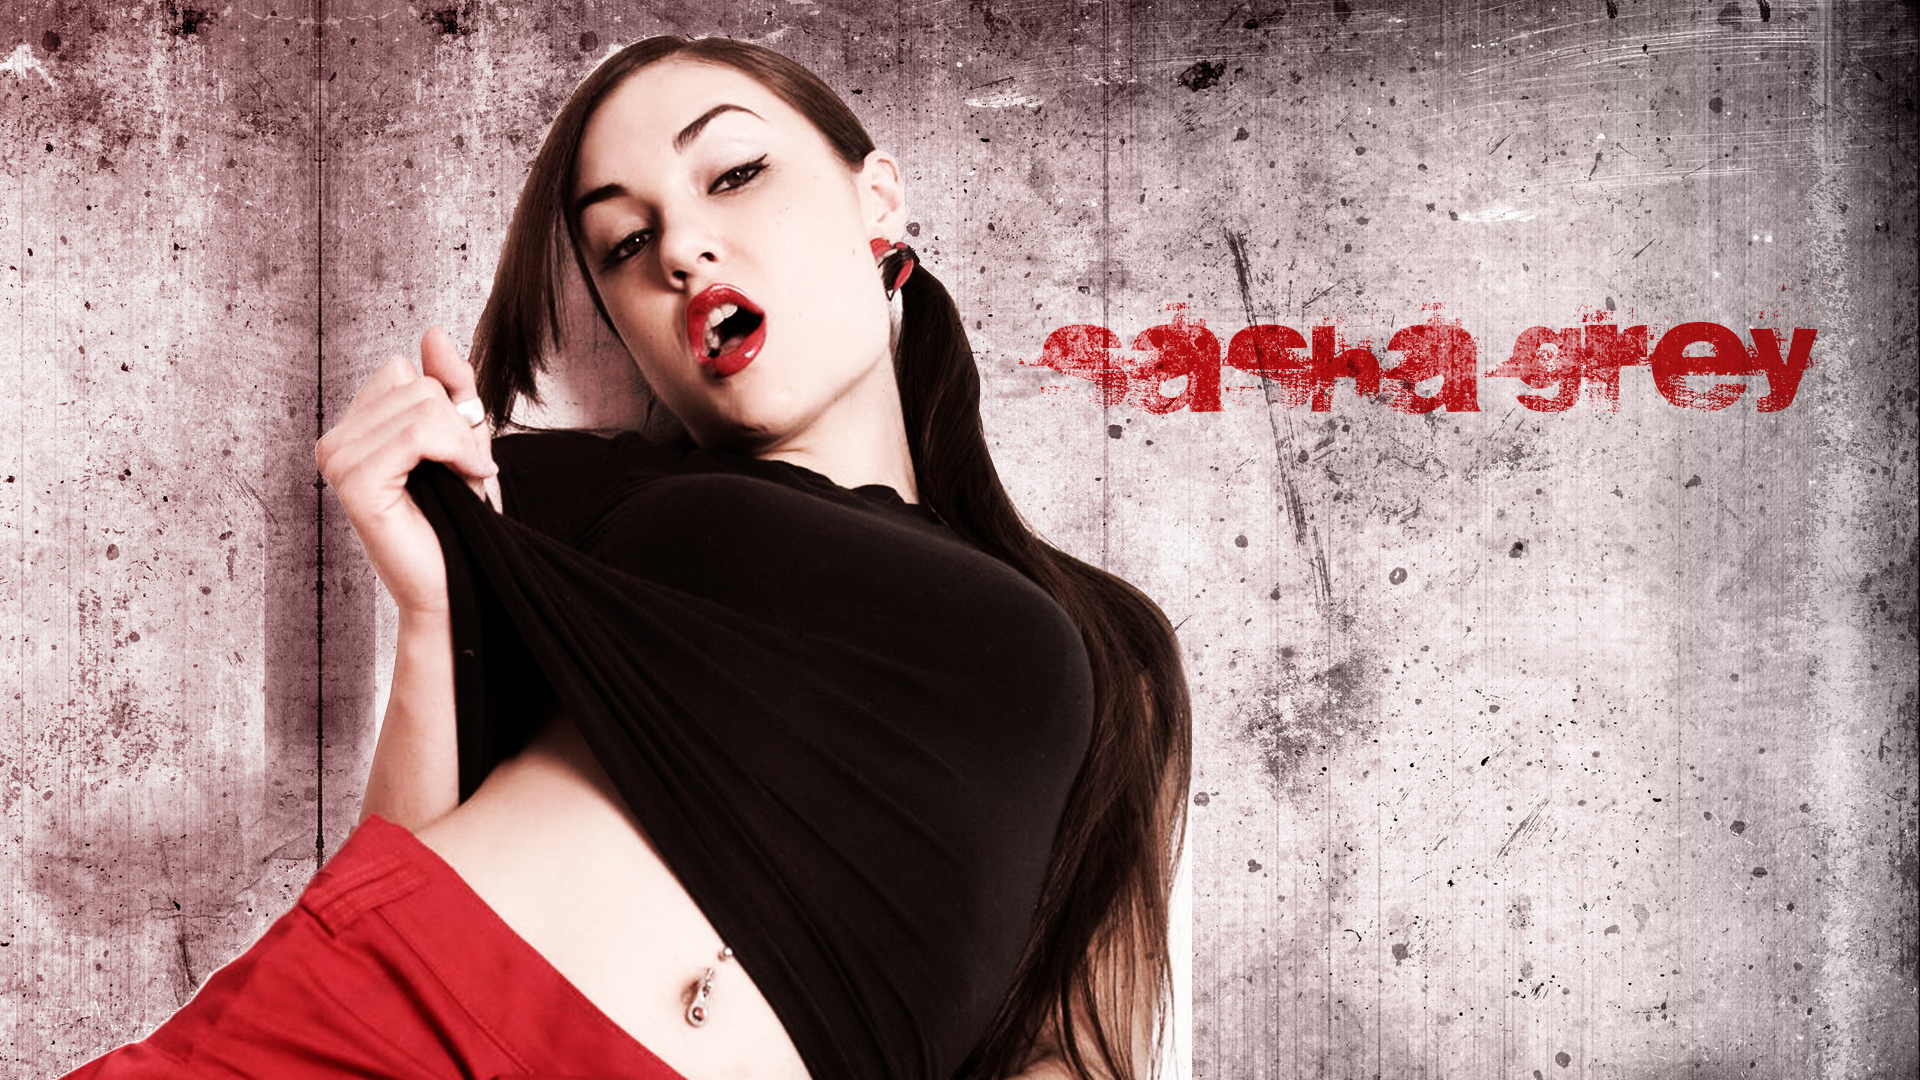 Famous Model Sasha Grey Wallpaper And Image Pictures